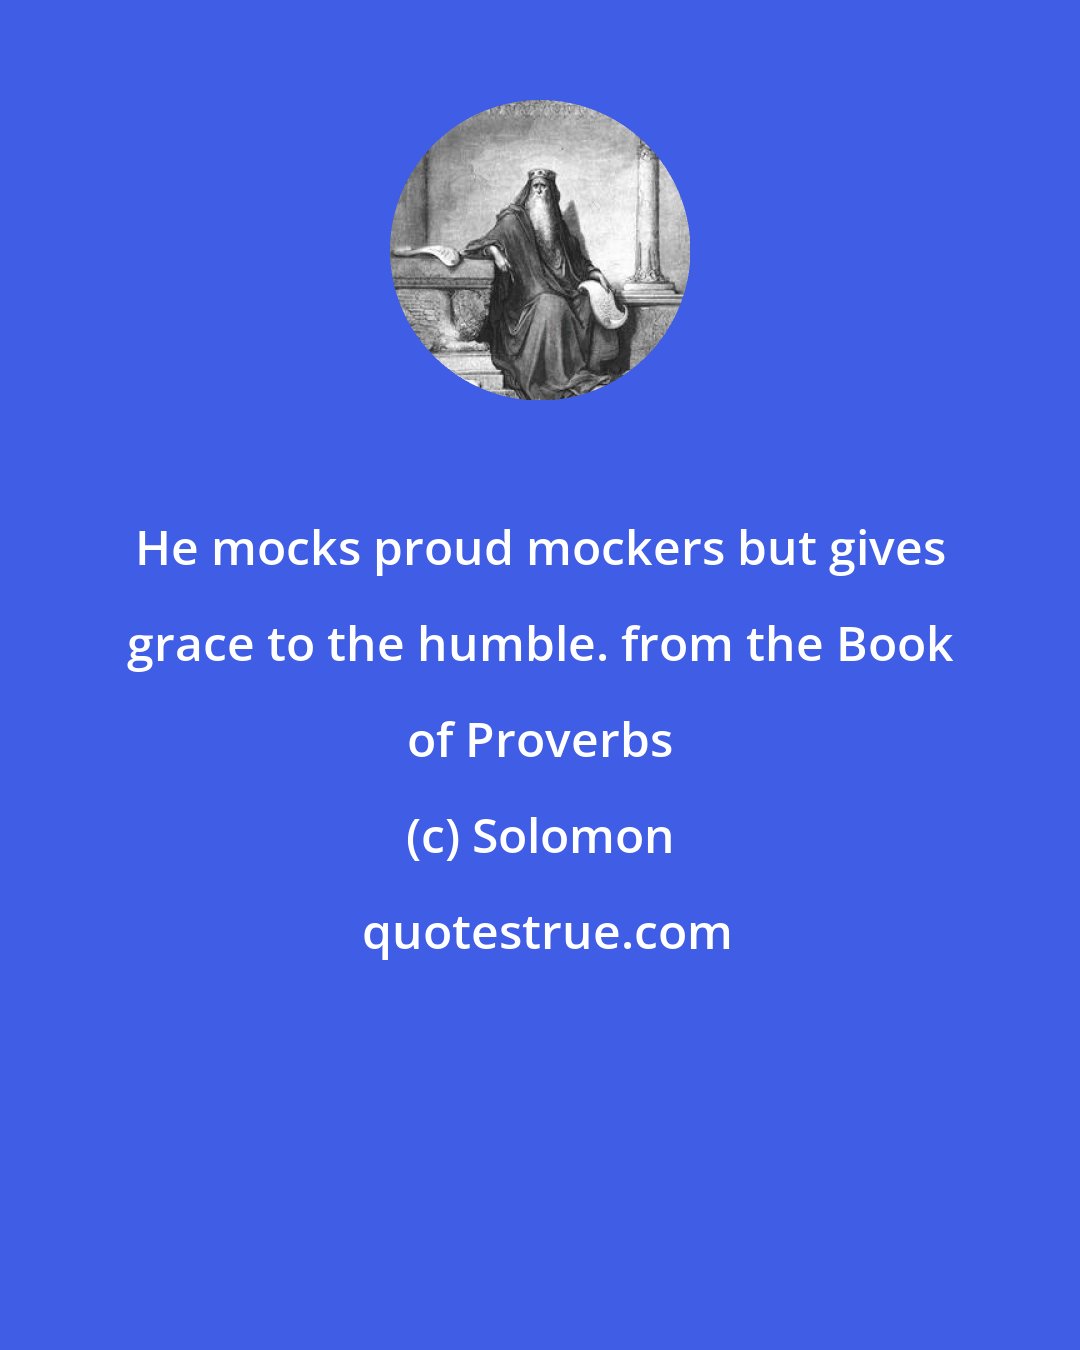 Solomon: He mocks proud mockers but gives grace to the humble. from the Book of Proverbs